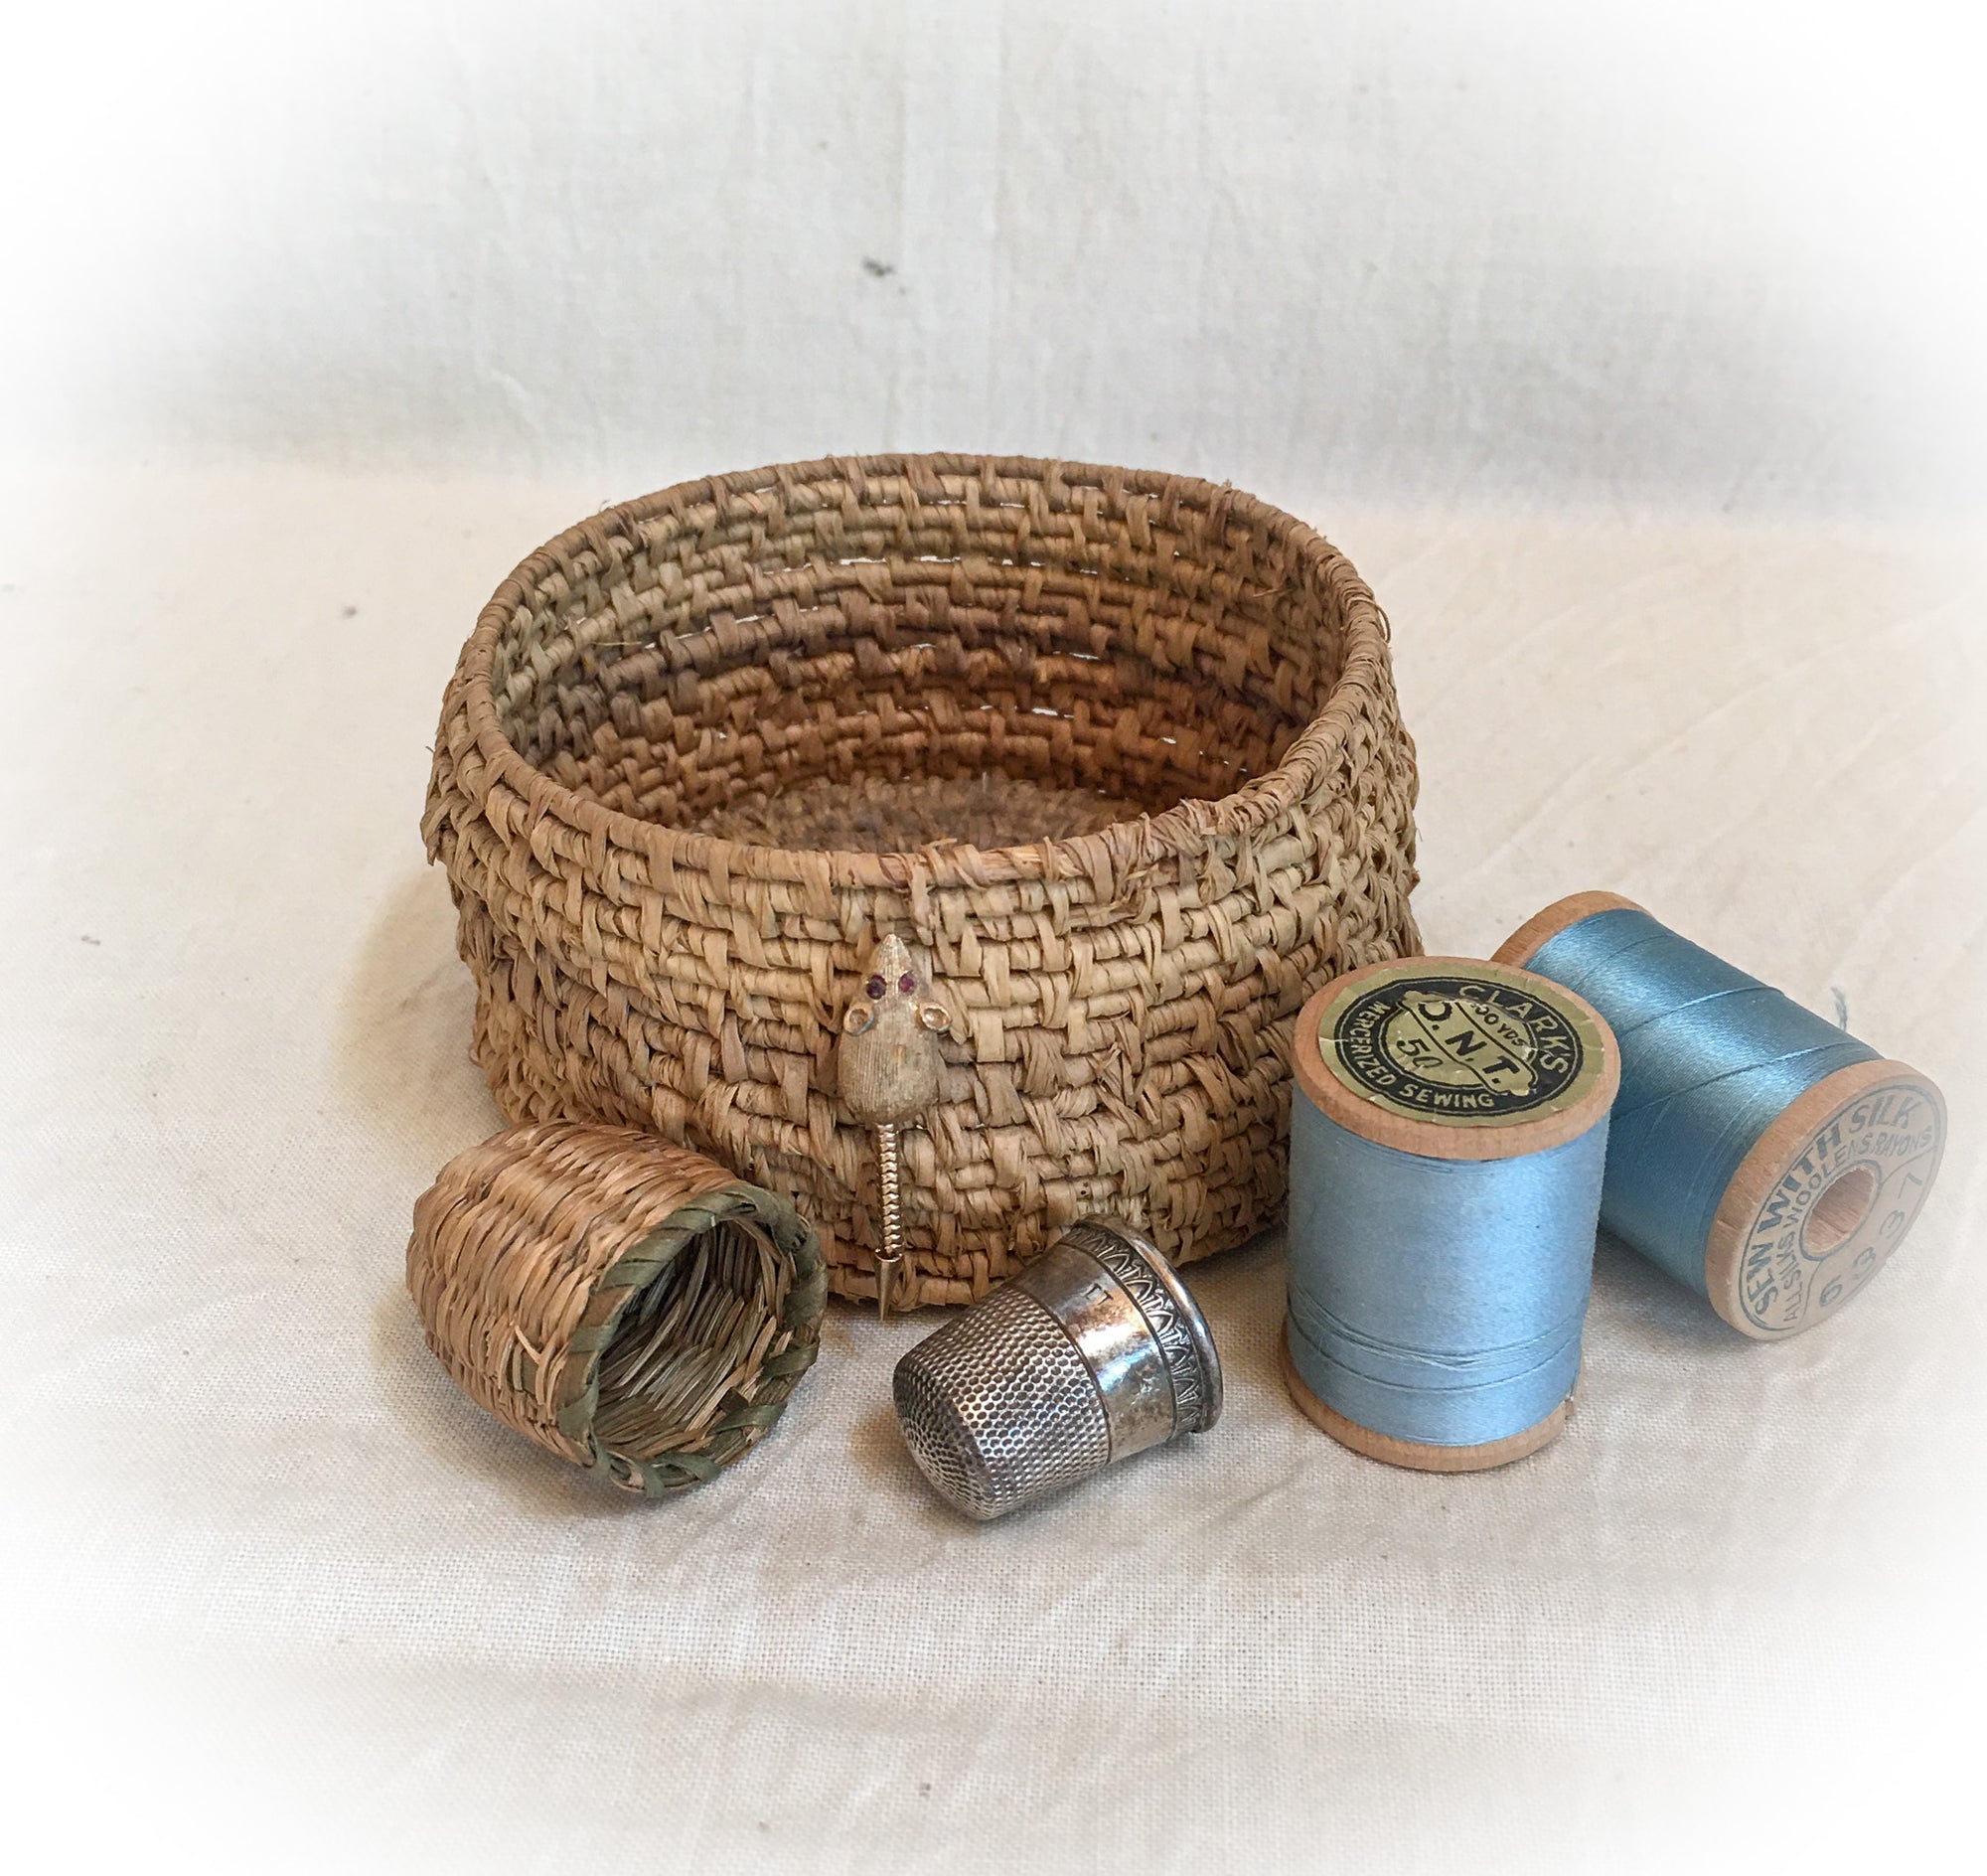 Antique Woven Sweetgrass Basket with Thimble Basket & Sterling Silver Thimble – Tiny Mouse Tie Tack Included!